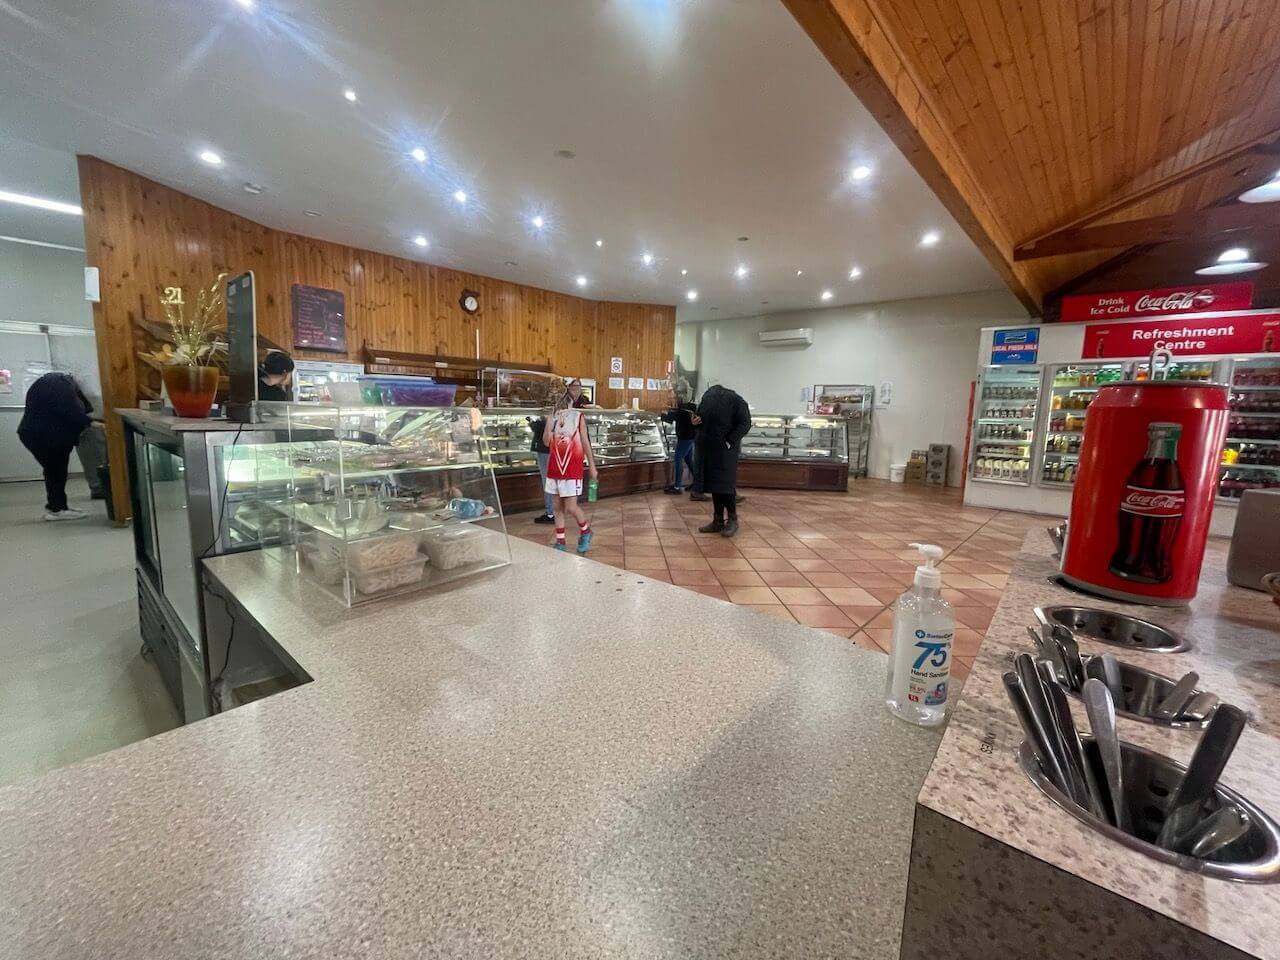 Prominent Bakery for Sale in VIC Regional